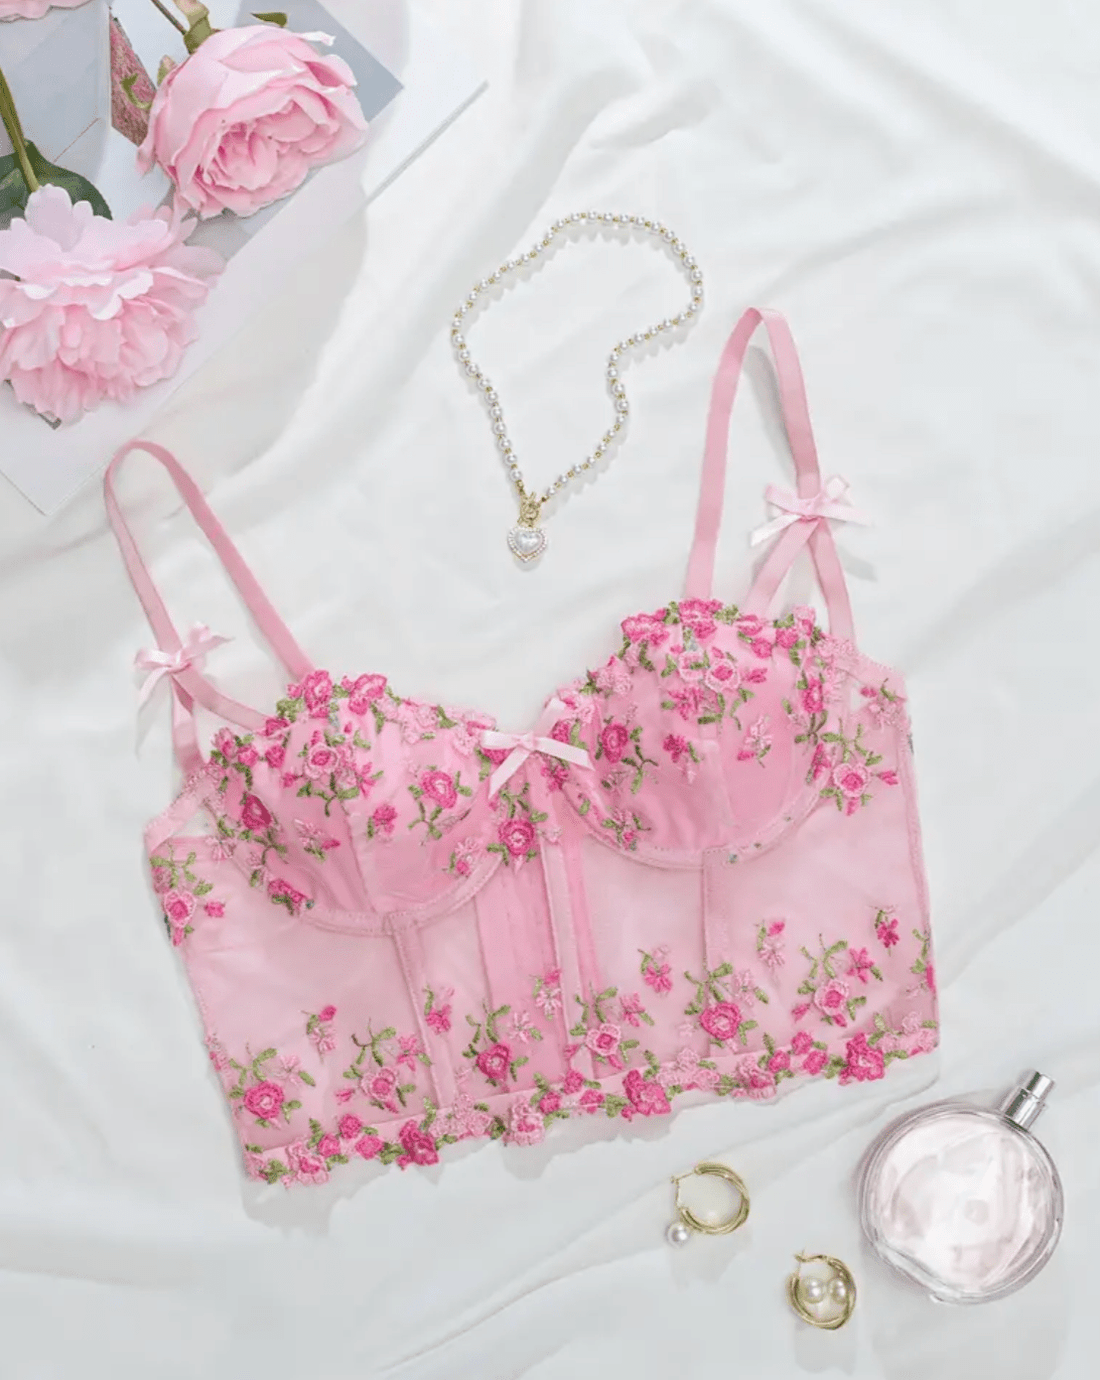 Corset Bralette Collection- Everyday Lingerie at Self Care Shop